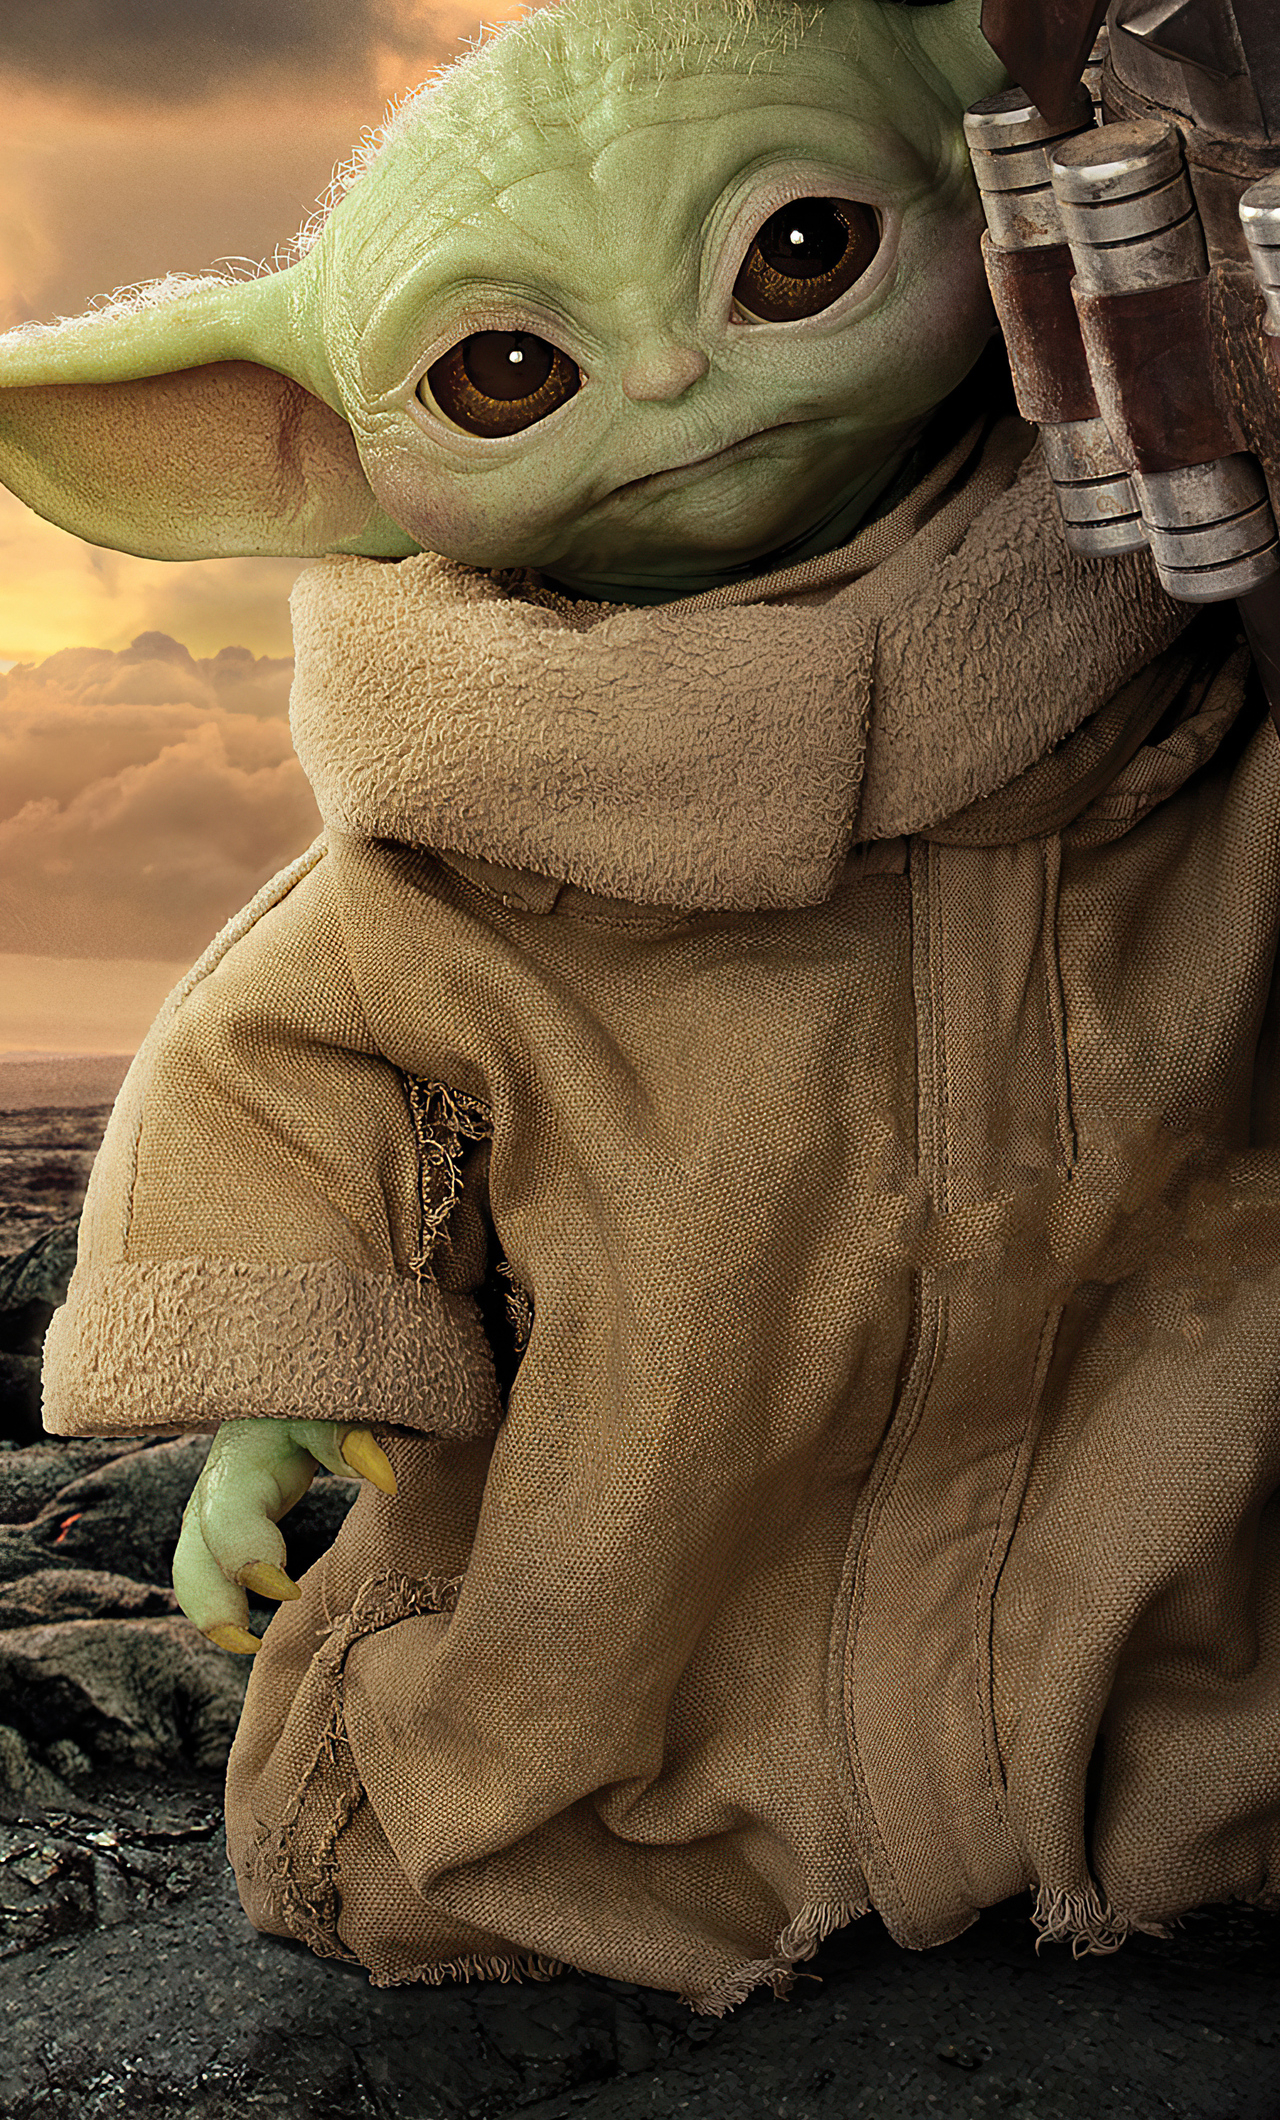 1280x2120 The Mandalorian Season 2 Baby Yoda iPhone 6+ HD 4k Wallpapers, Images, Backgrounds, Photos and Pictures